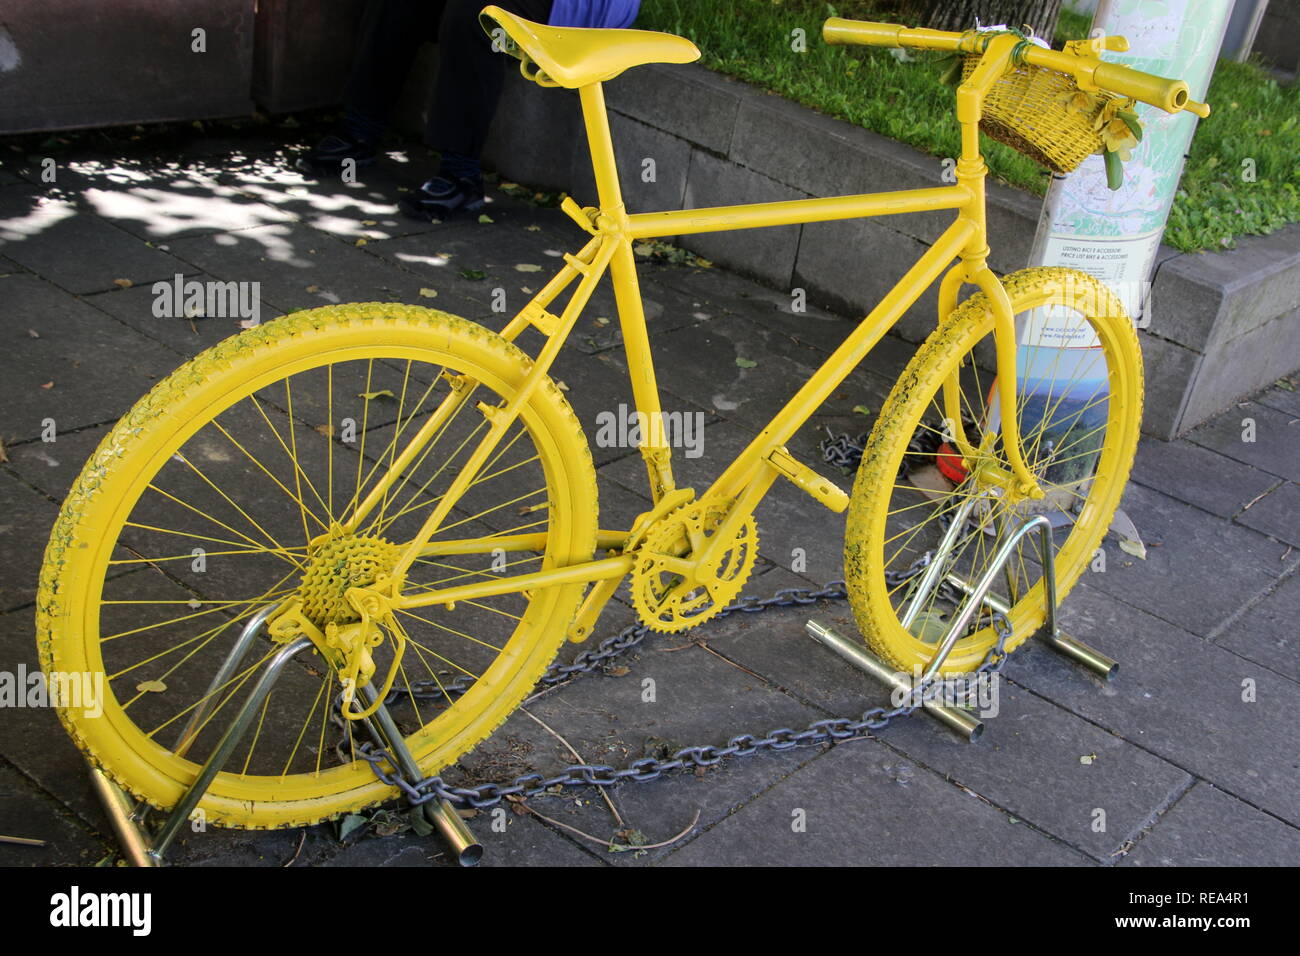 the-yellow-bicycle-is-a-bright-color-REA